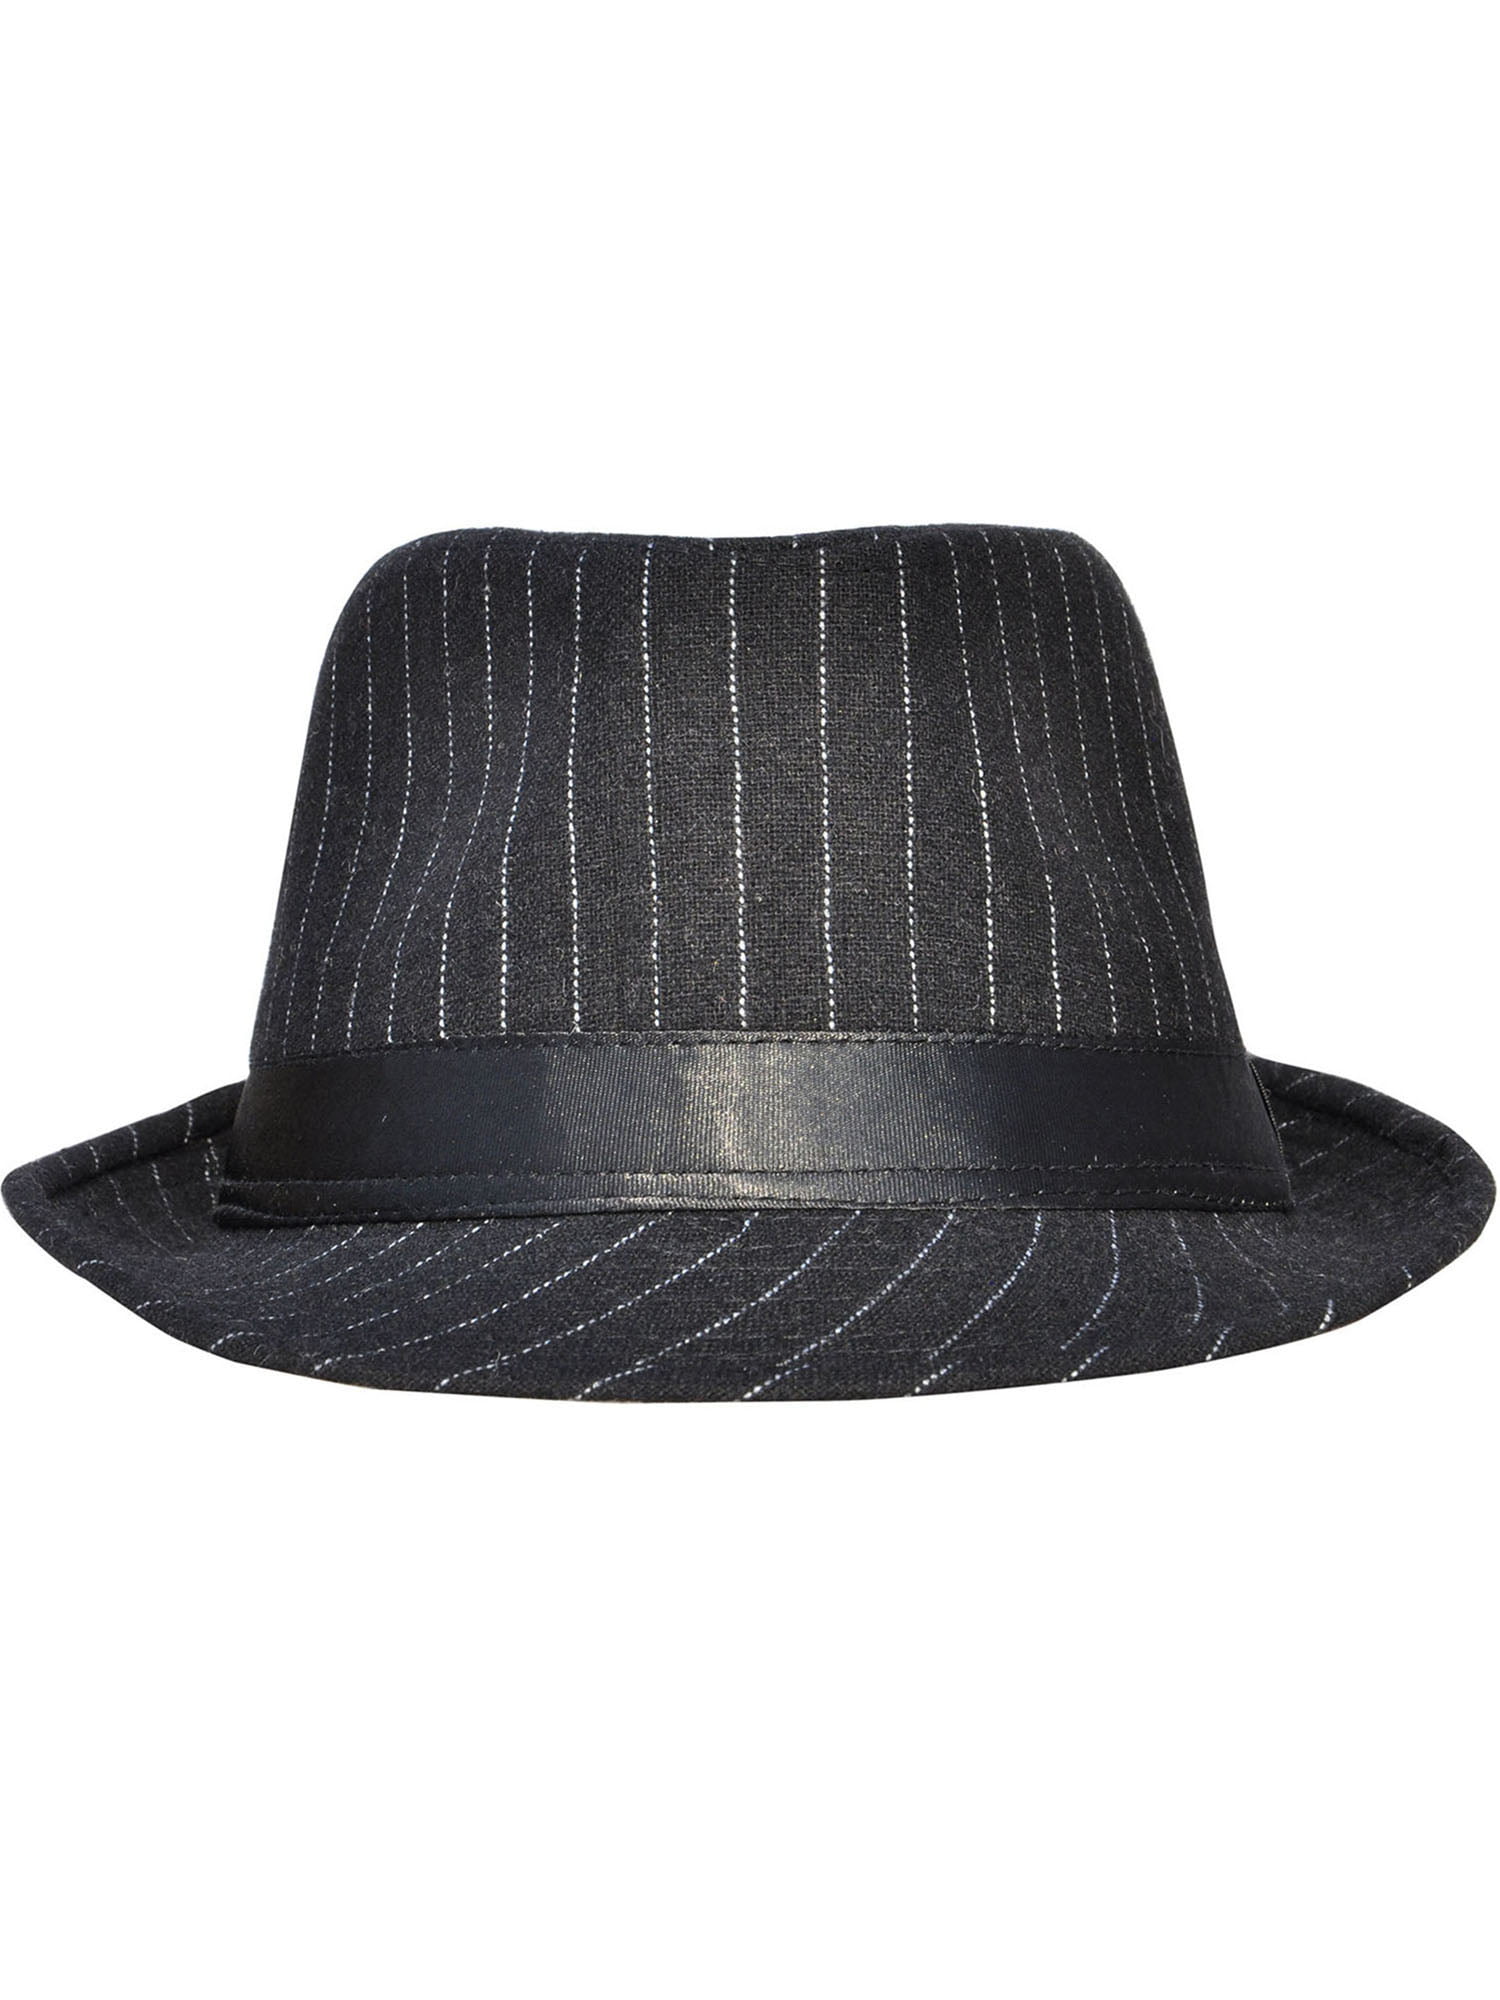 Black Ladies Womens Mens Unisex Pinstripe Trilby Hat with Matching Stripy Band 